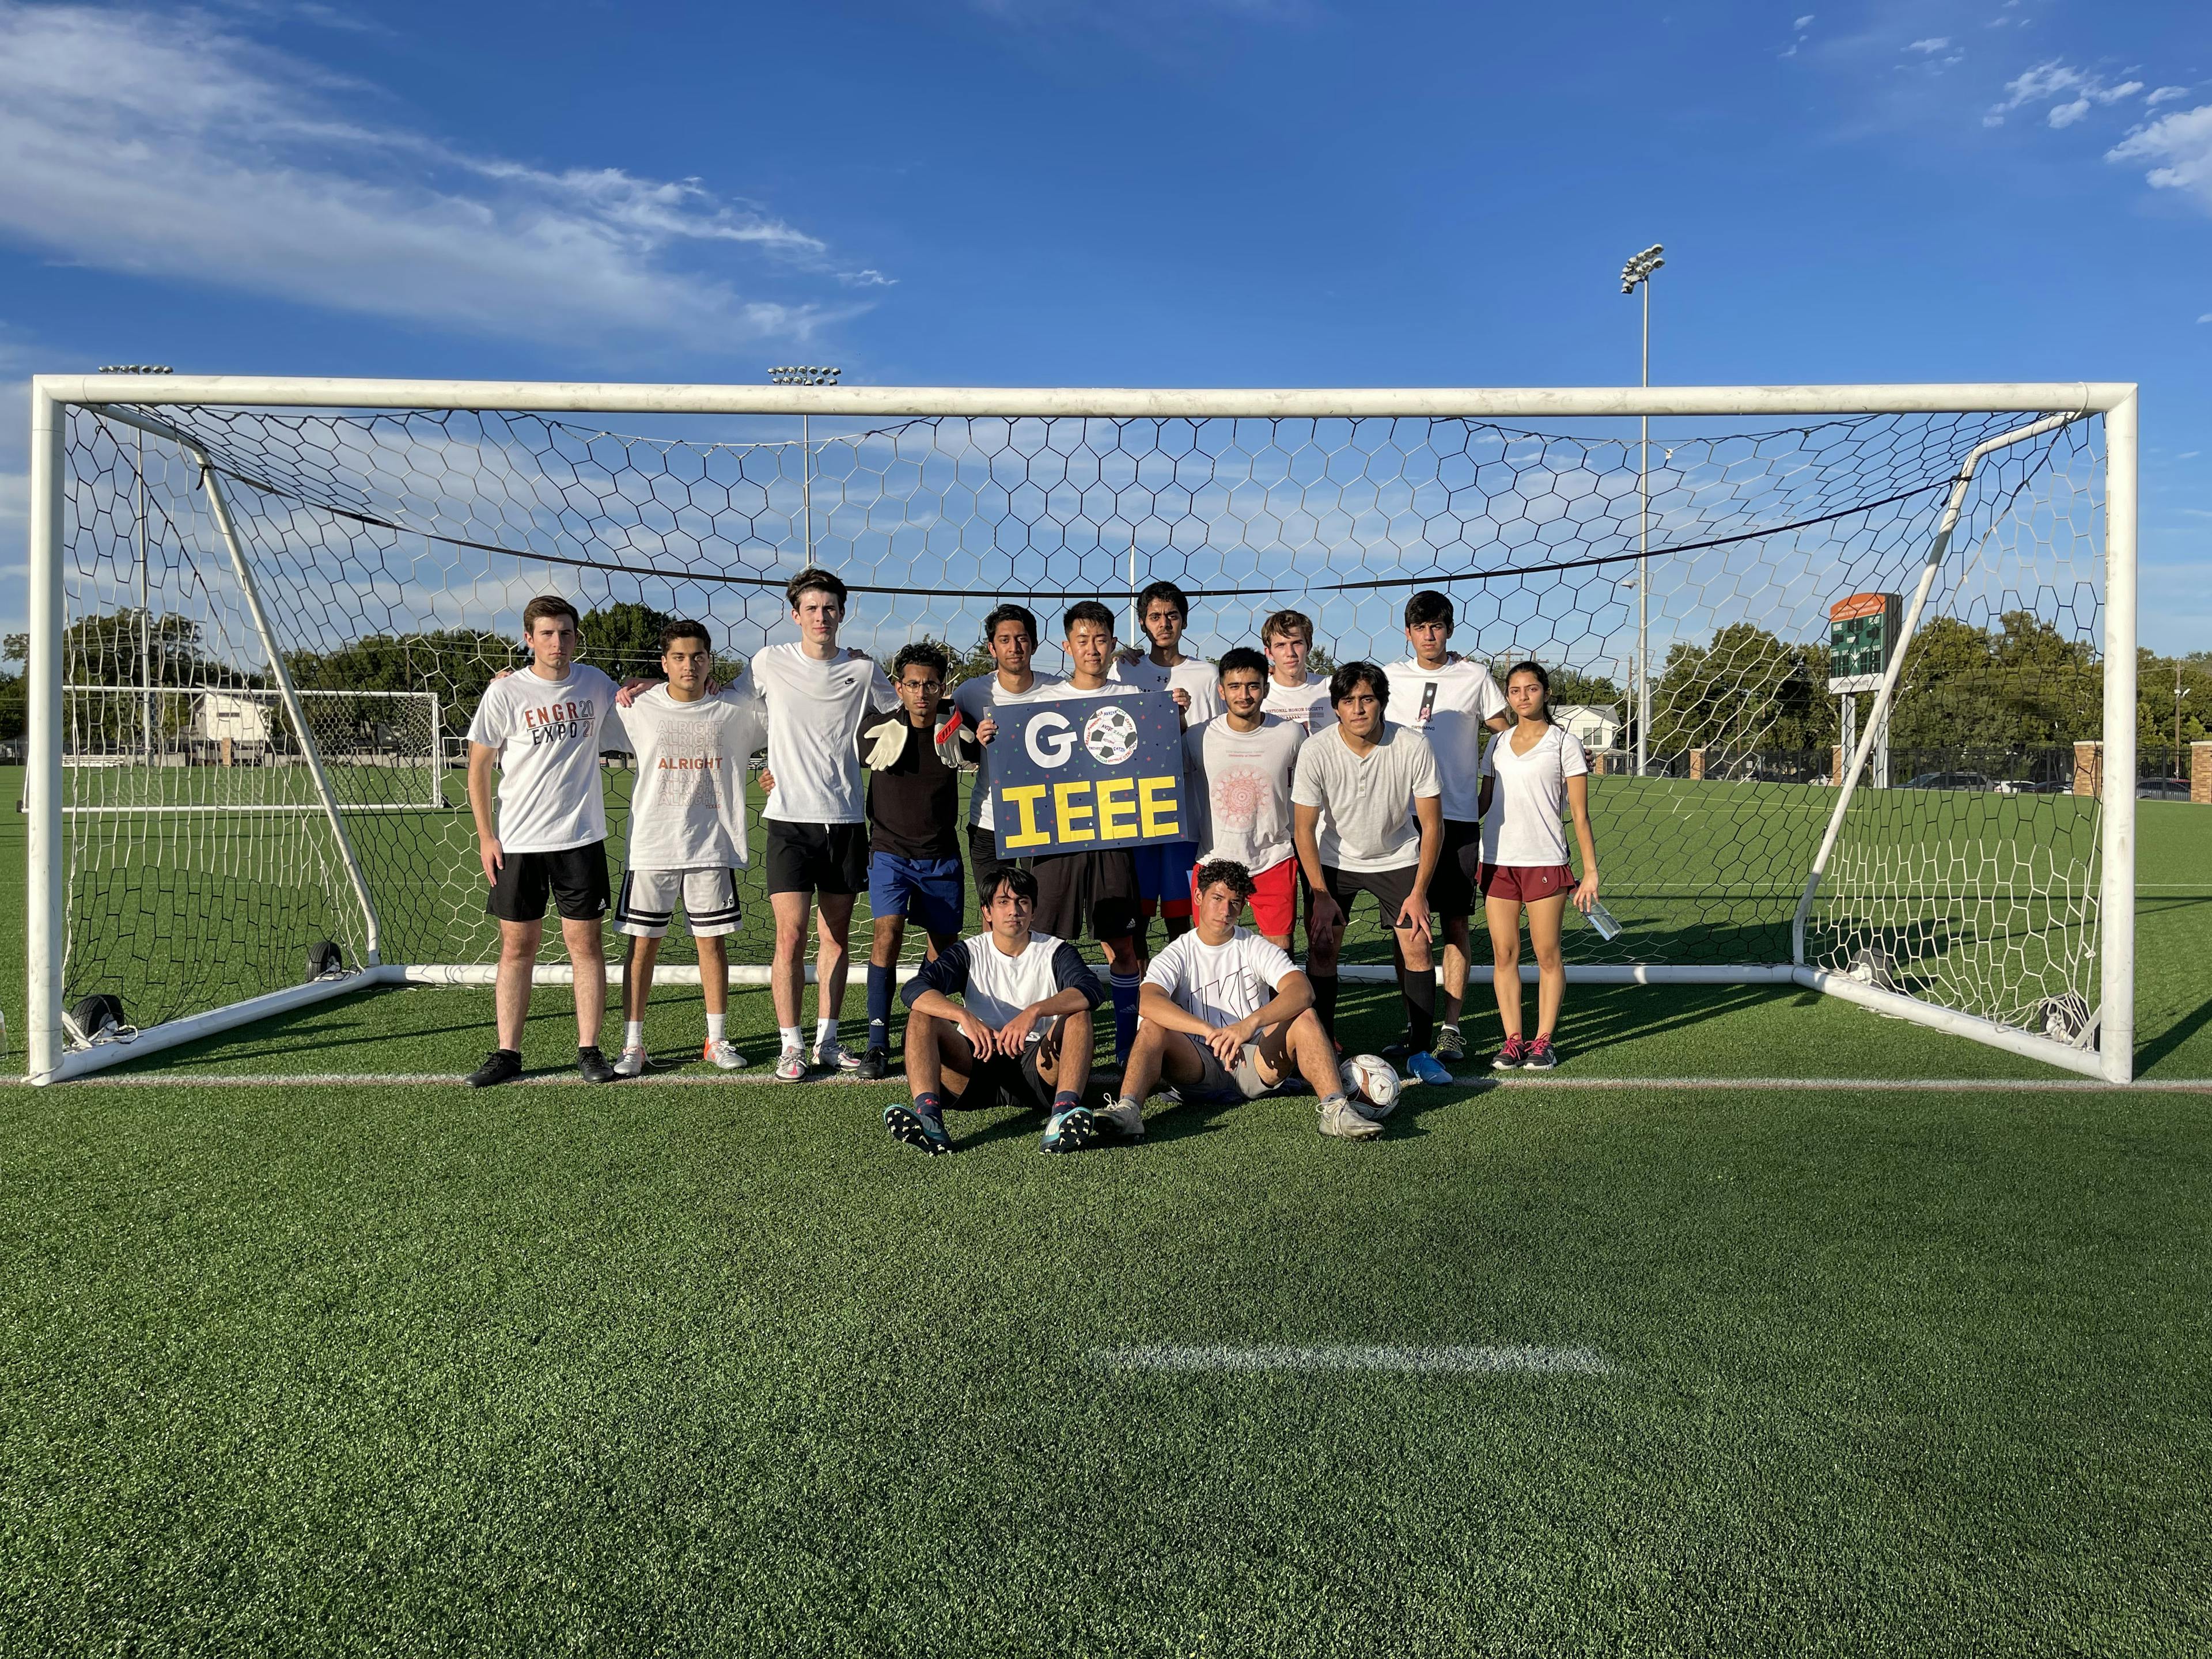 Group photo of soccer intramural team in front of soccer goal